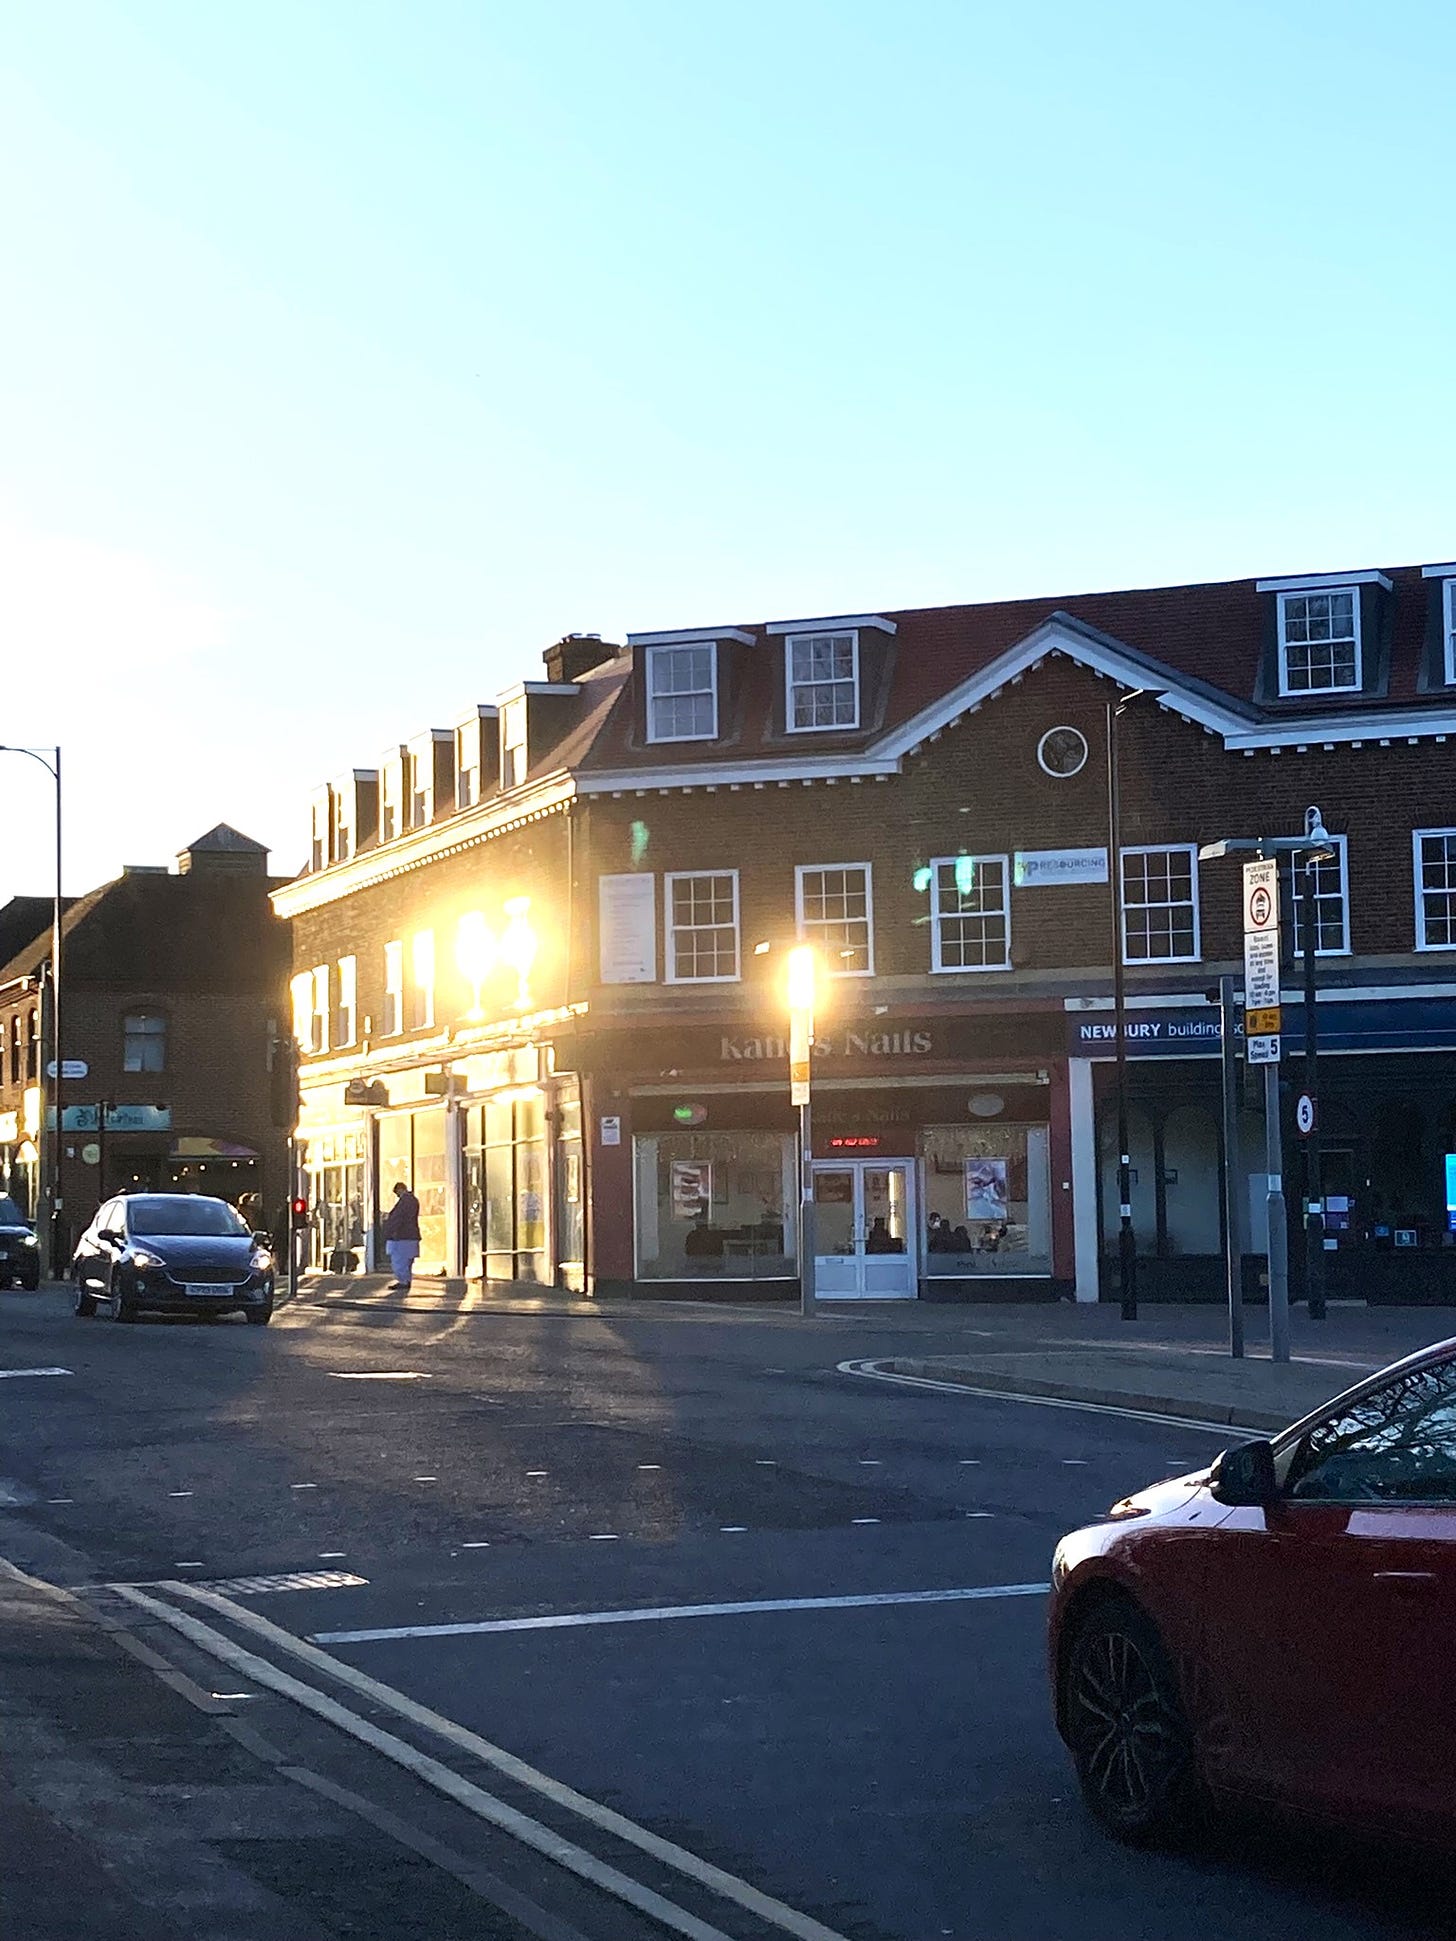 An average high street featuring shops, nail salons, building societies and cars. The sun is glinting off the windows, under a bright blue sky.